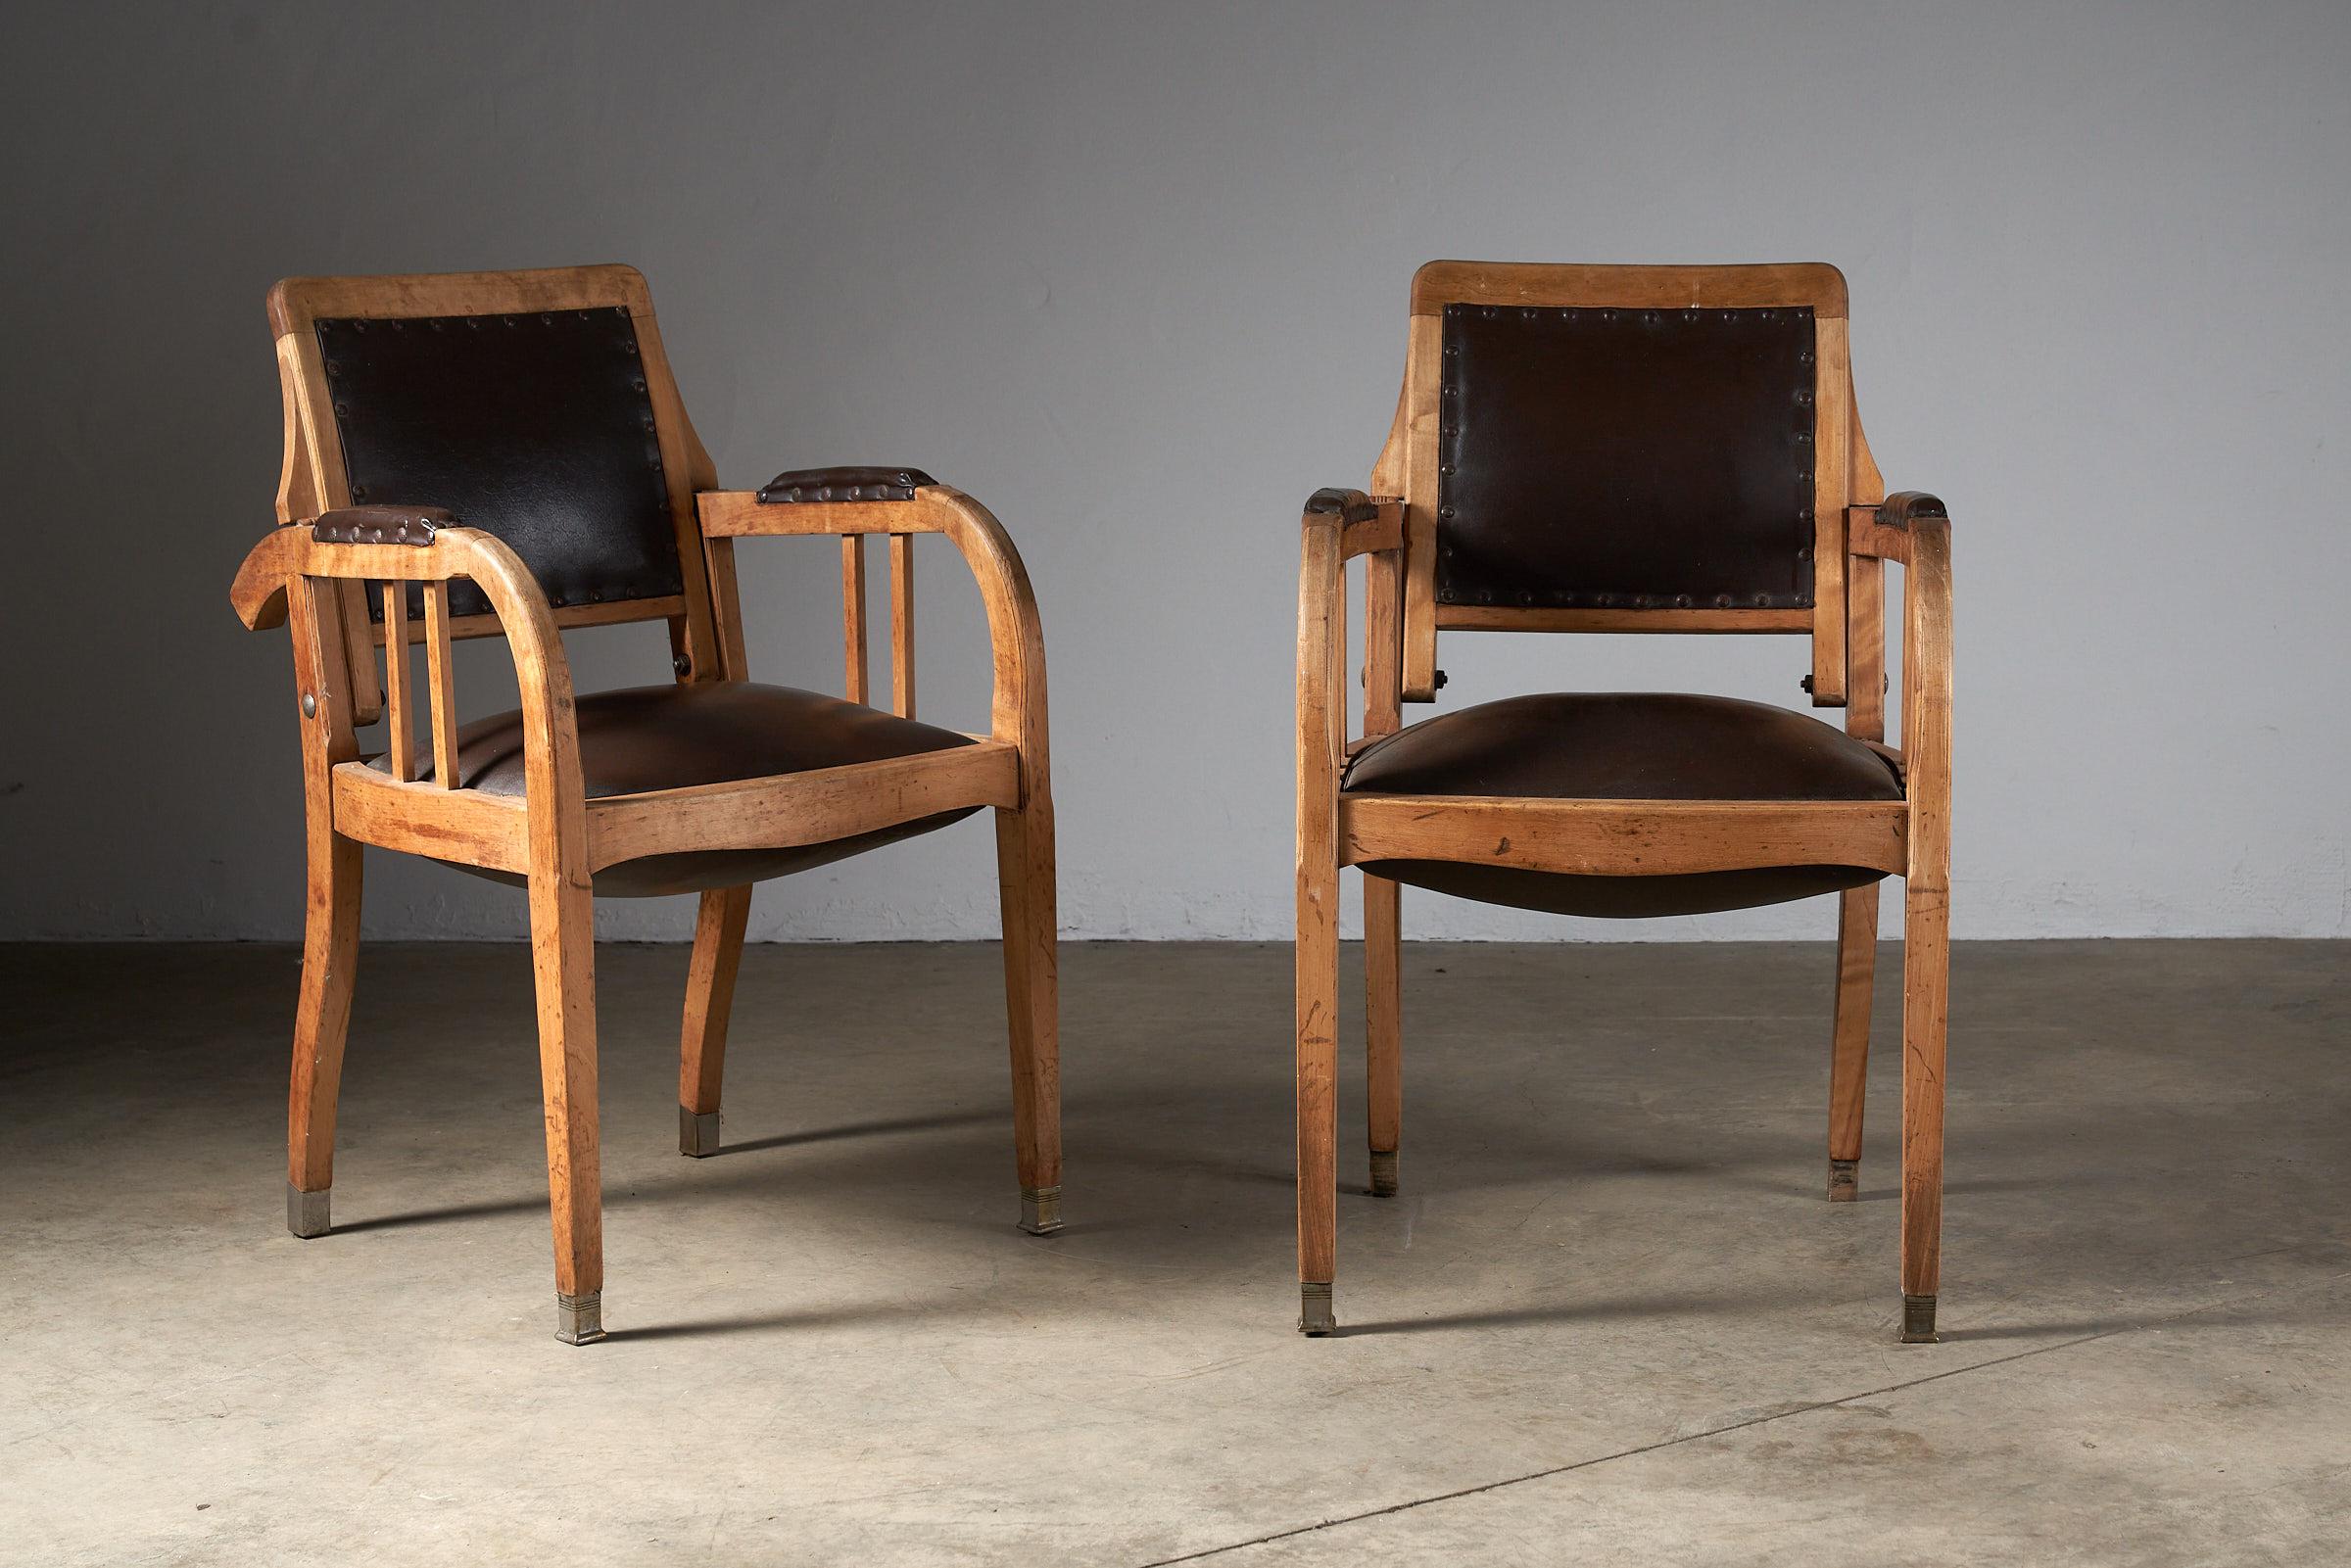 Embark on a journey into the past with these antique hairdresser chairs, a captivating duo that transcends time. Not merely decorative but incredibly comfortable, each chair is a stand-alone masterpiece for your interior. The adjustable back offers